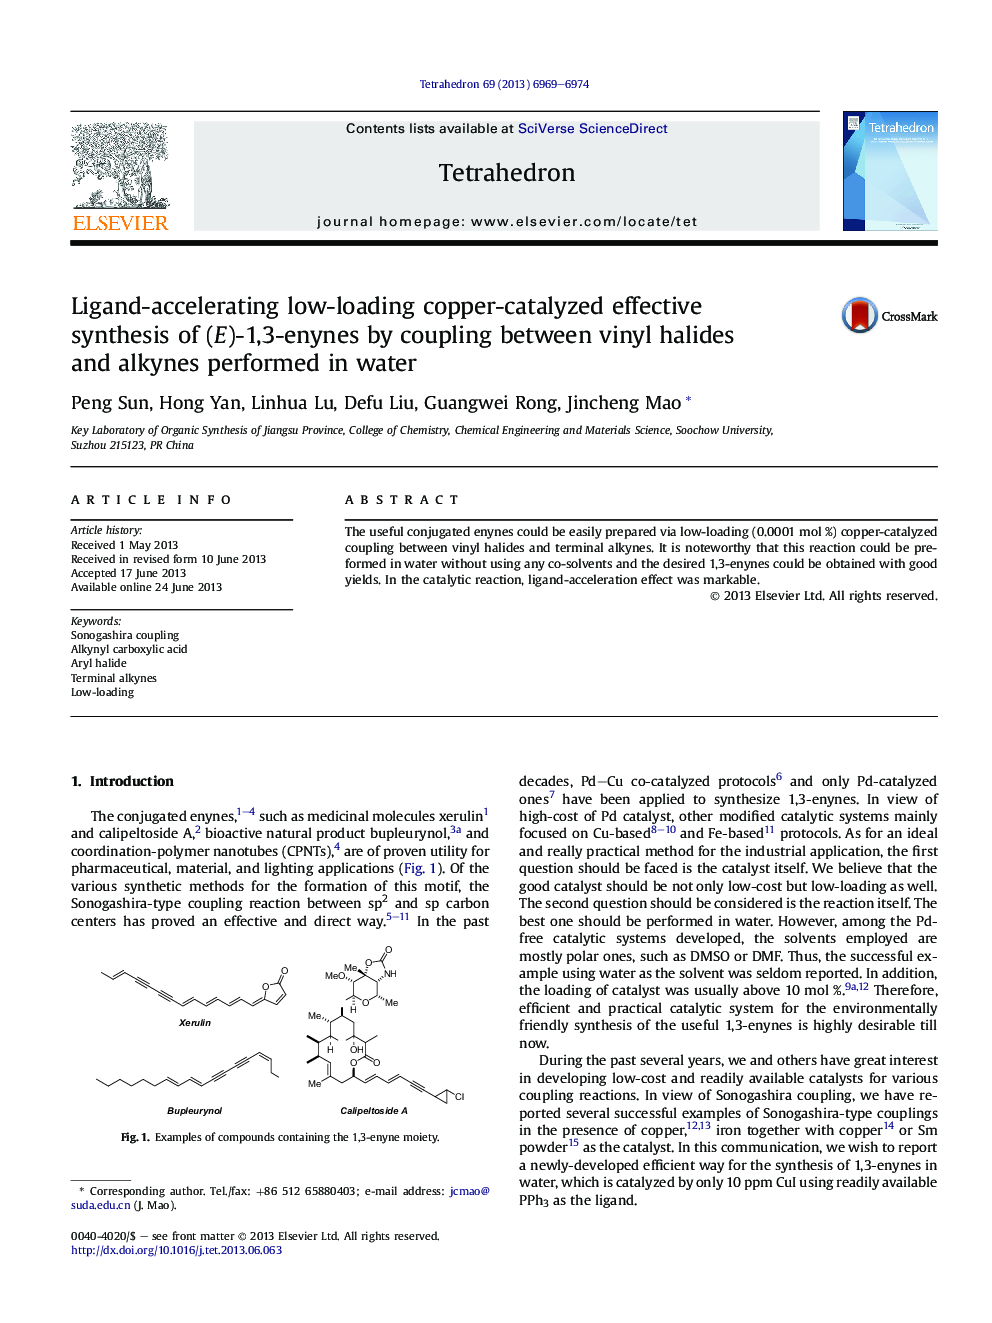 Ligand-accelerating low-loading copper-catalyzed effective synthesis of (E)-1,3-enynes by coupling between vinyl halides andÂ alkynes performed in water